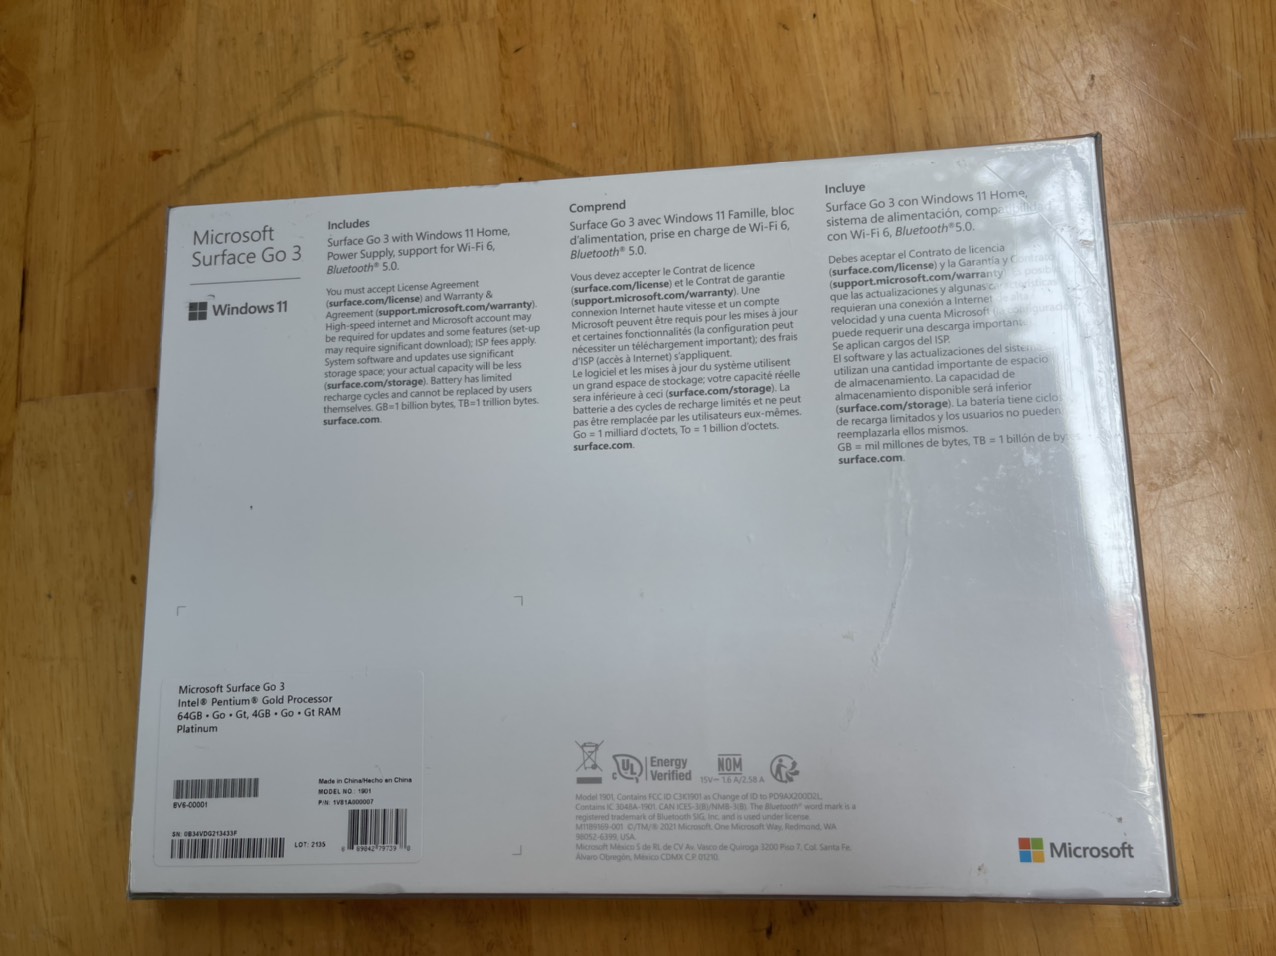 Microsoft Surface Go 3, Pentium Gold 6500Y, 4G, 64G, new seal 100%